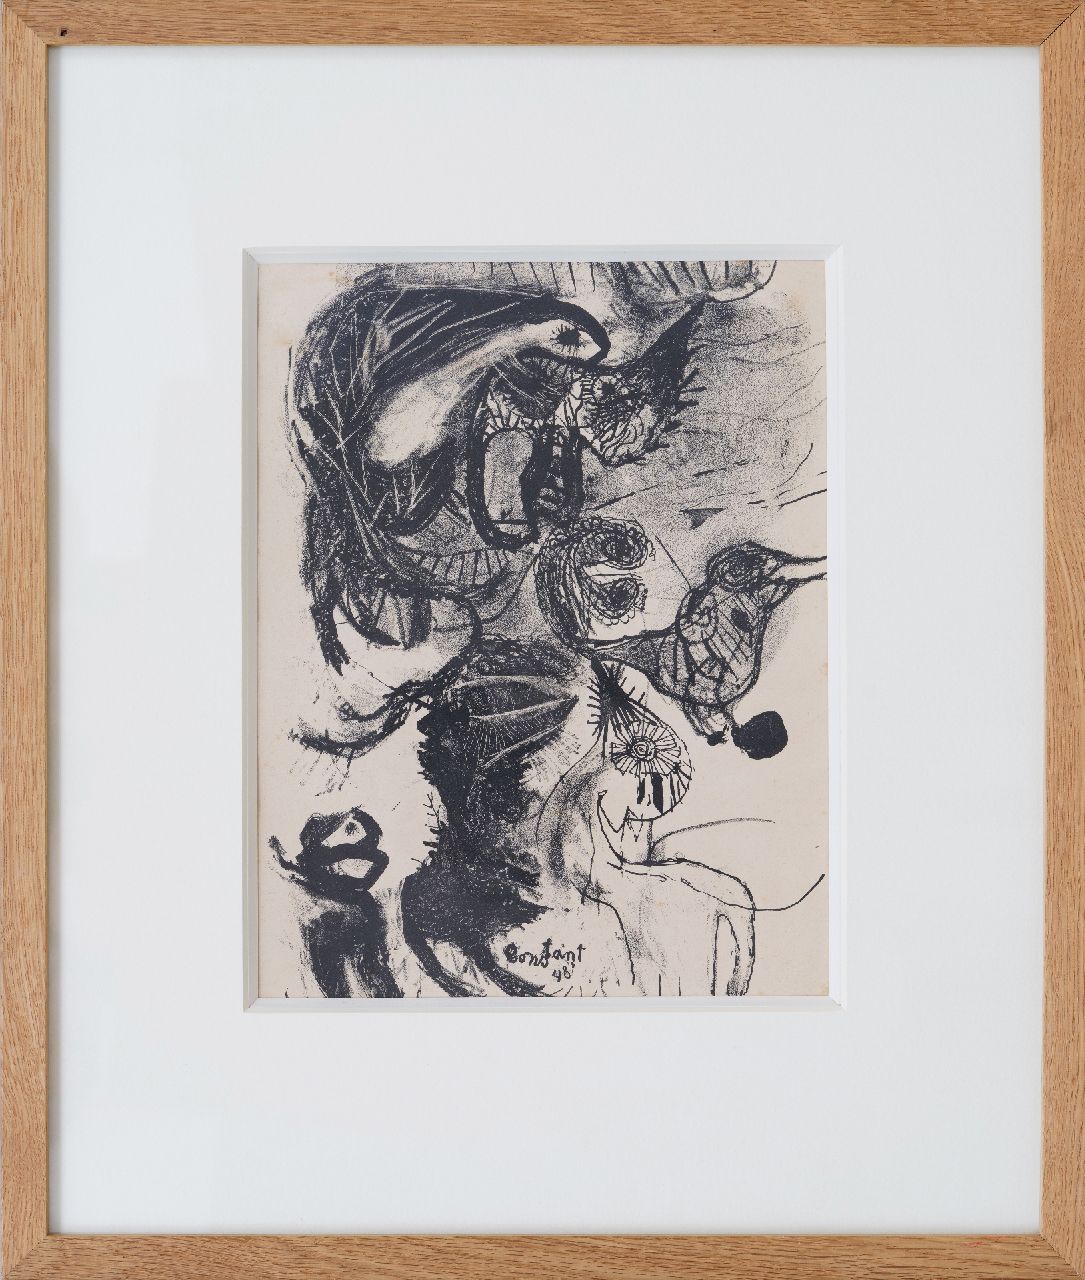 Constant (Constant Anton Nieuwenhuijs)   | Constant (Constant Anton Nieuwenhuijs) | Prints and Multiples offered for sale | Dieren (Animals), lithograph 29.0 x 22.0 cm, signed l.c. and dated '48